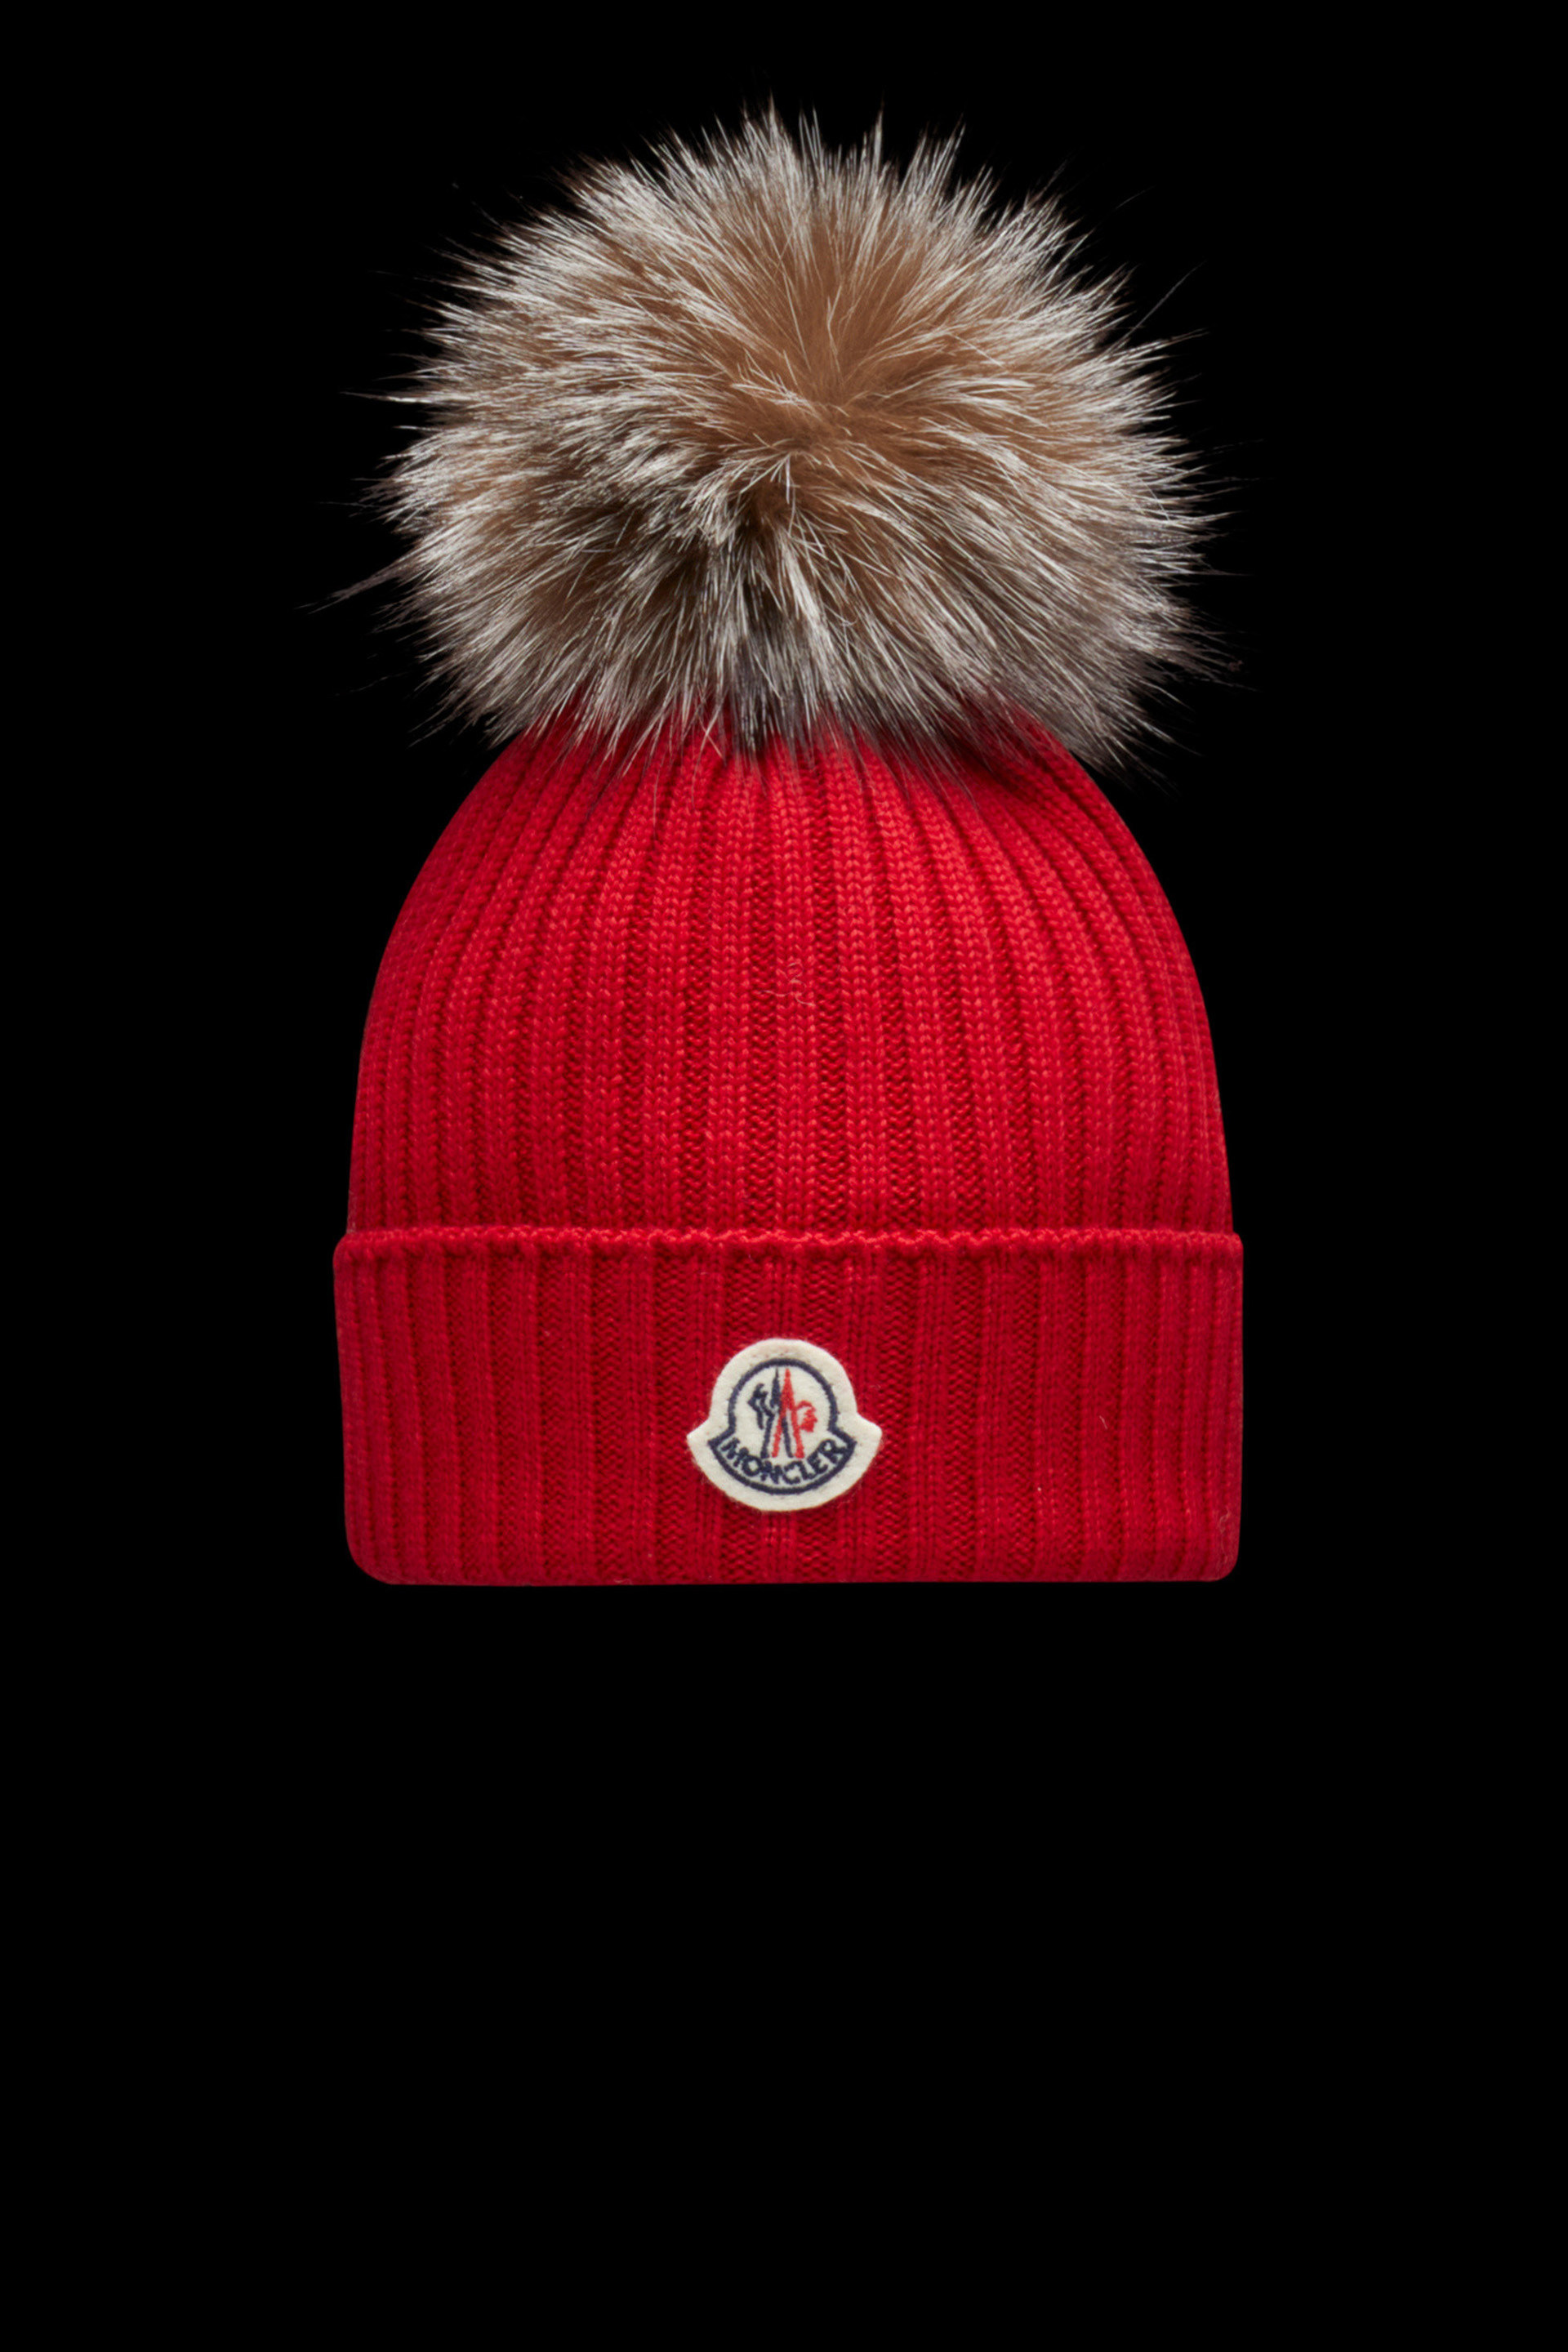 Red Beanie With Pom Pom - Accessories for Children | US